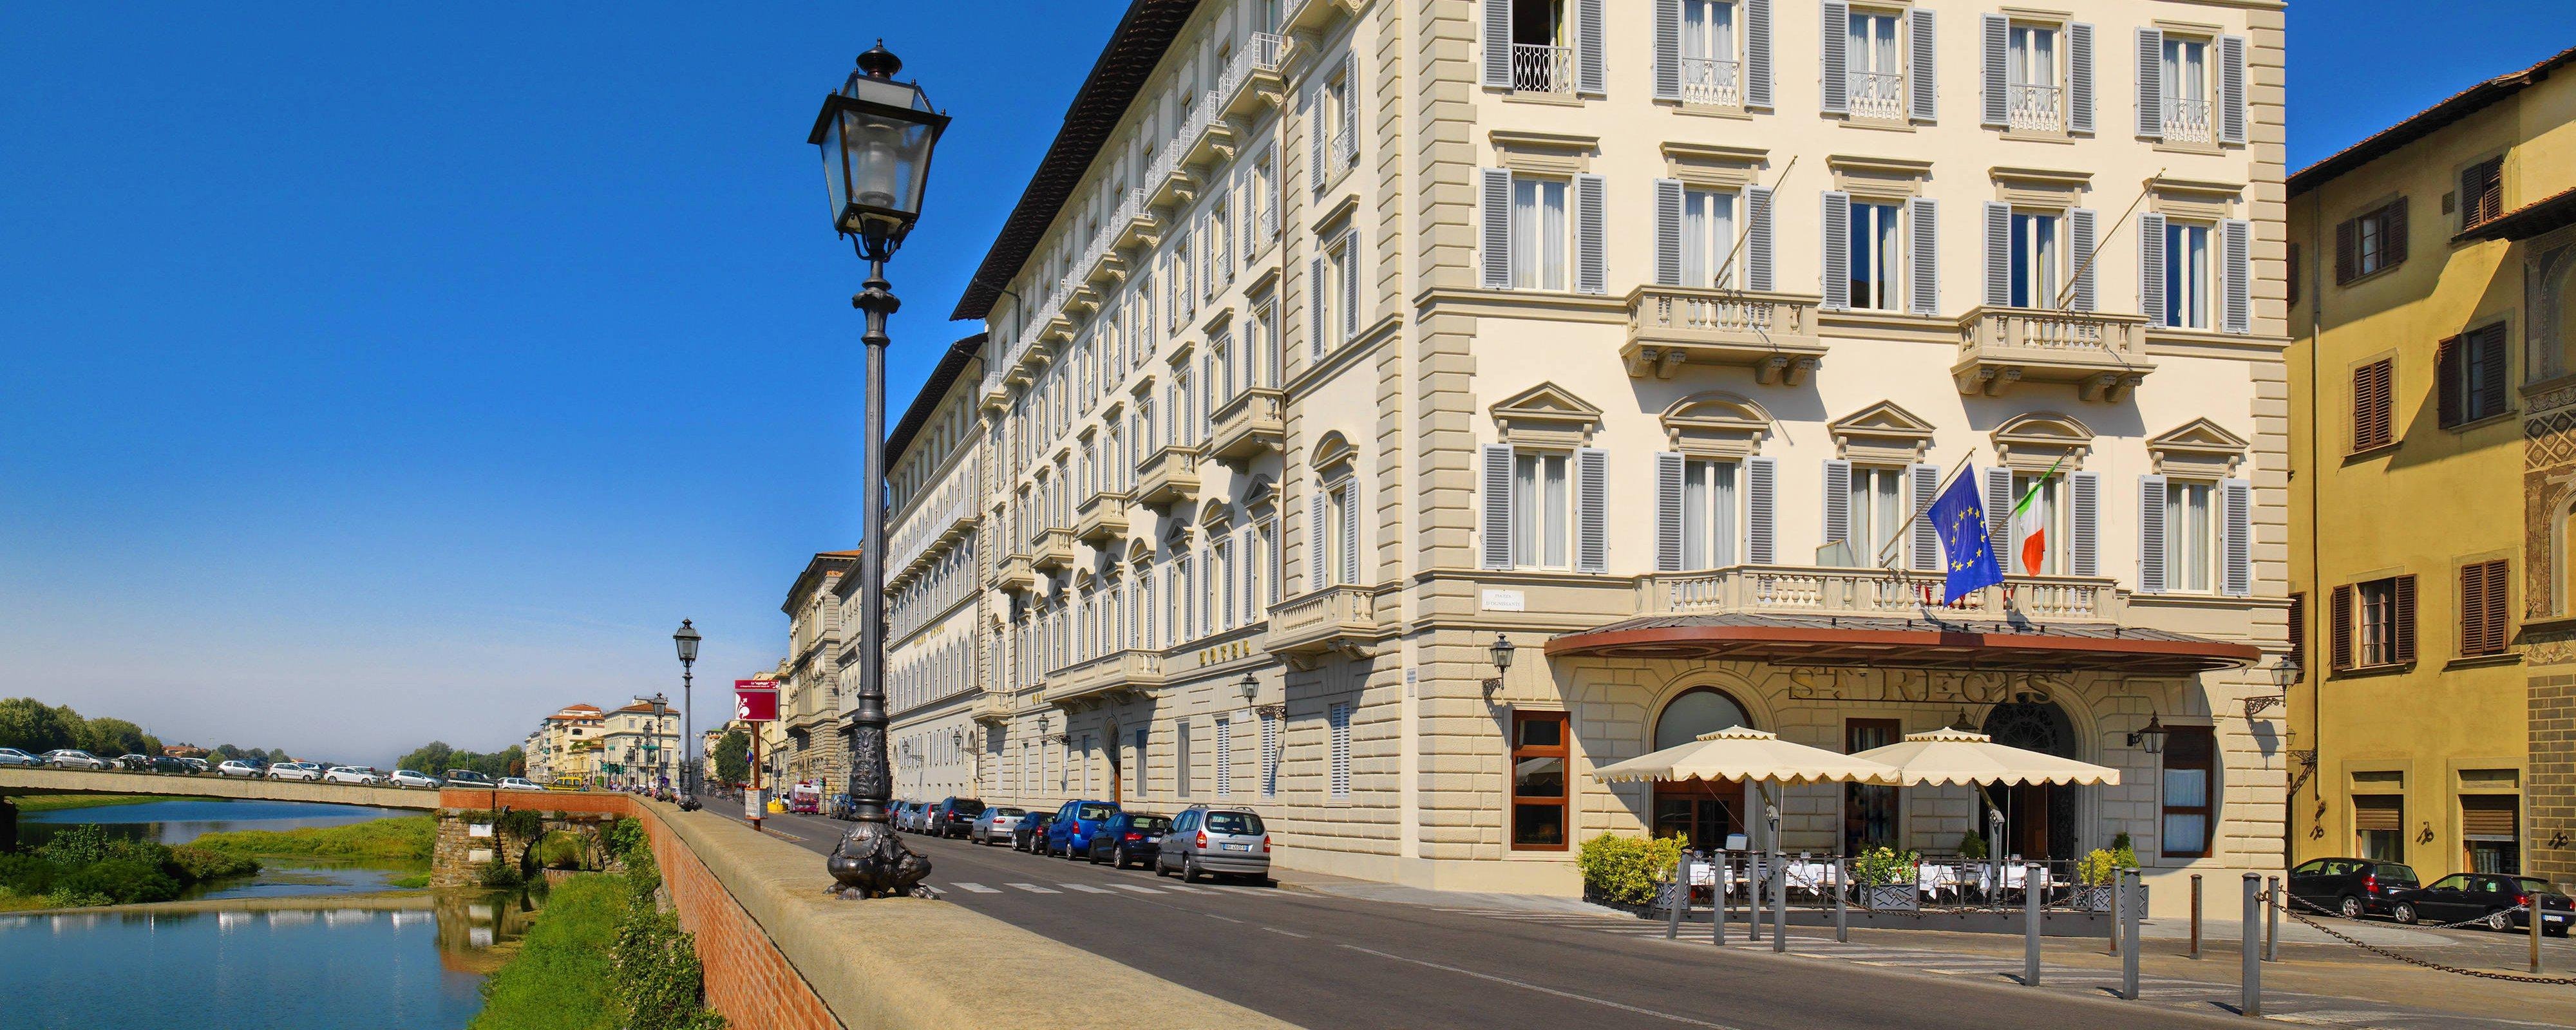 Image for The St. Regis Florence, a Marriott hotel.